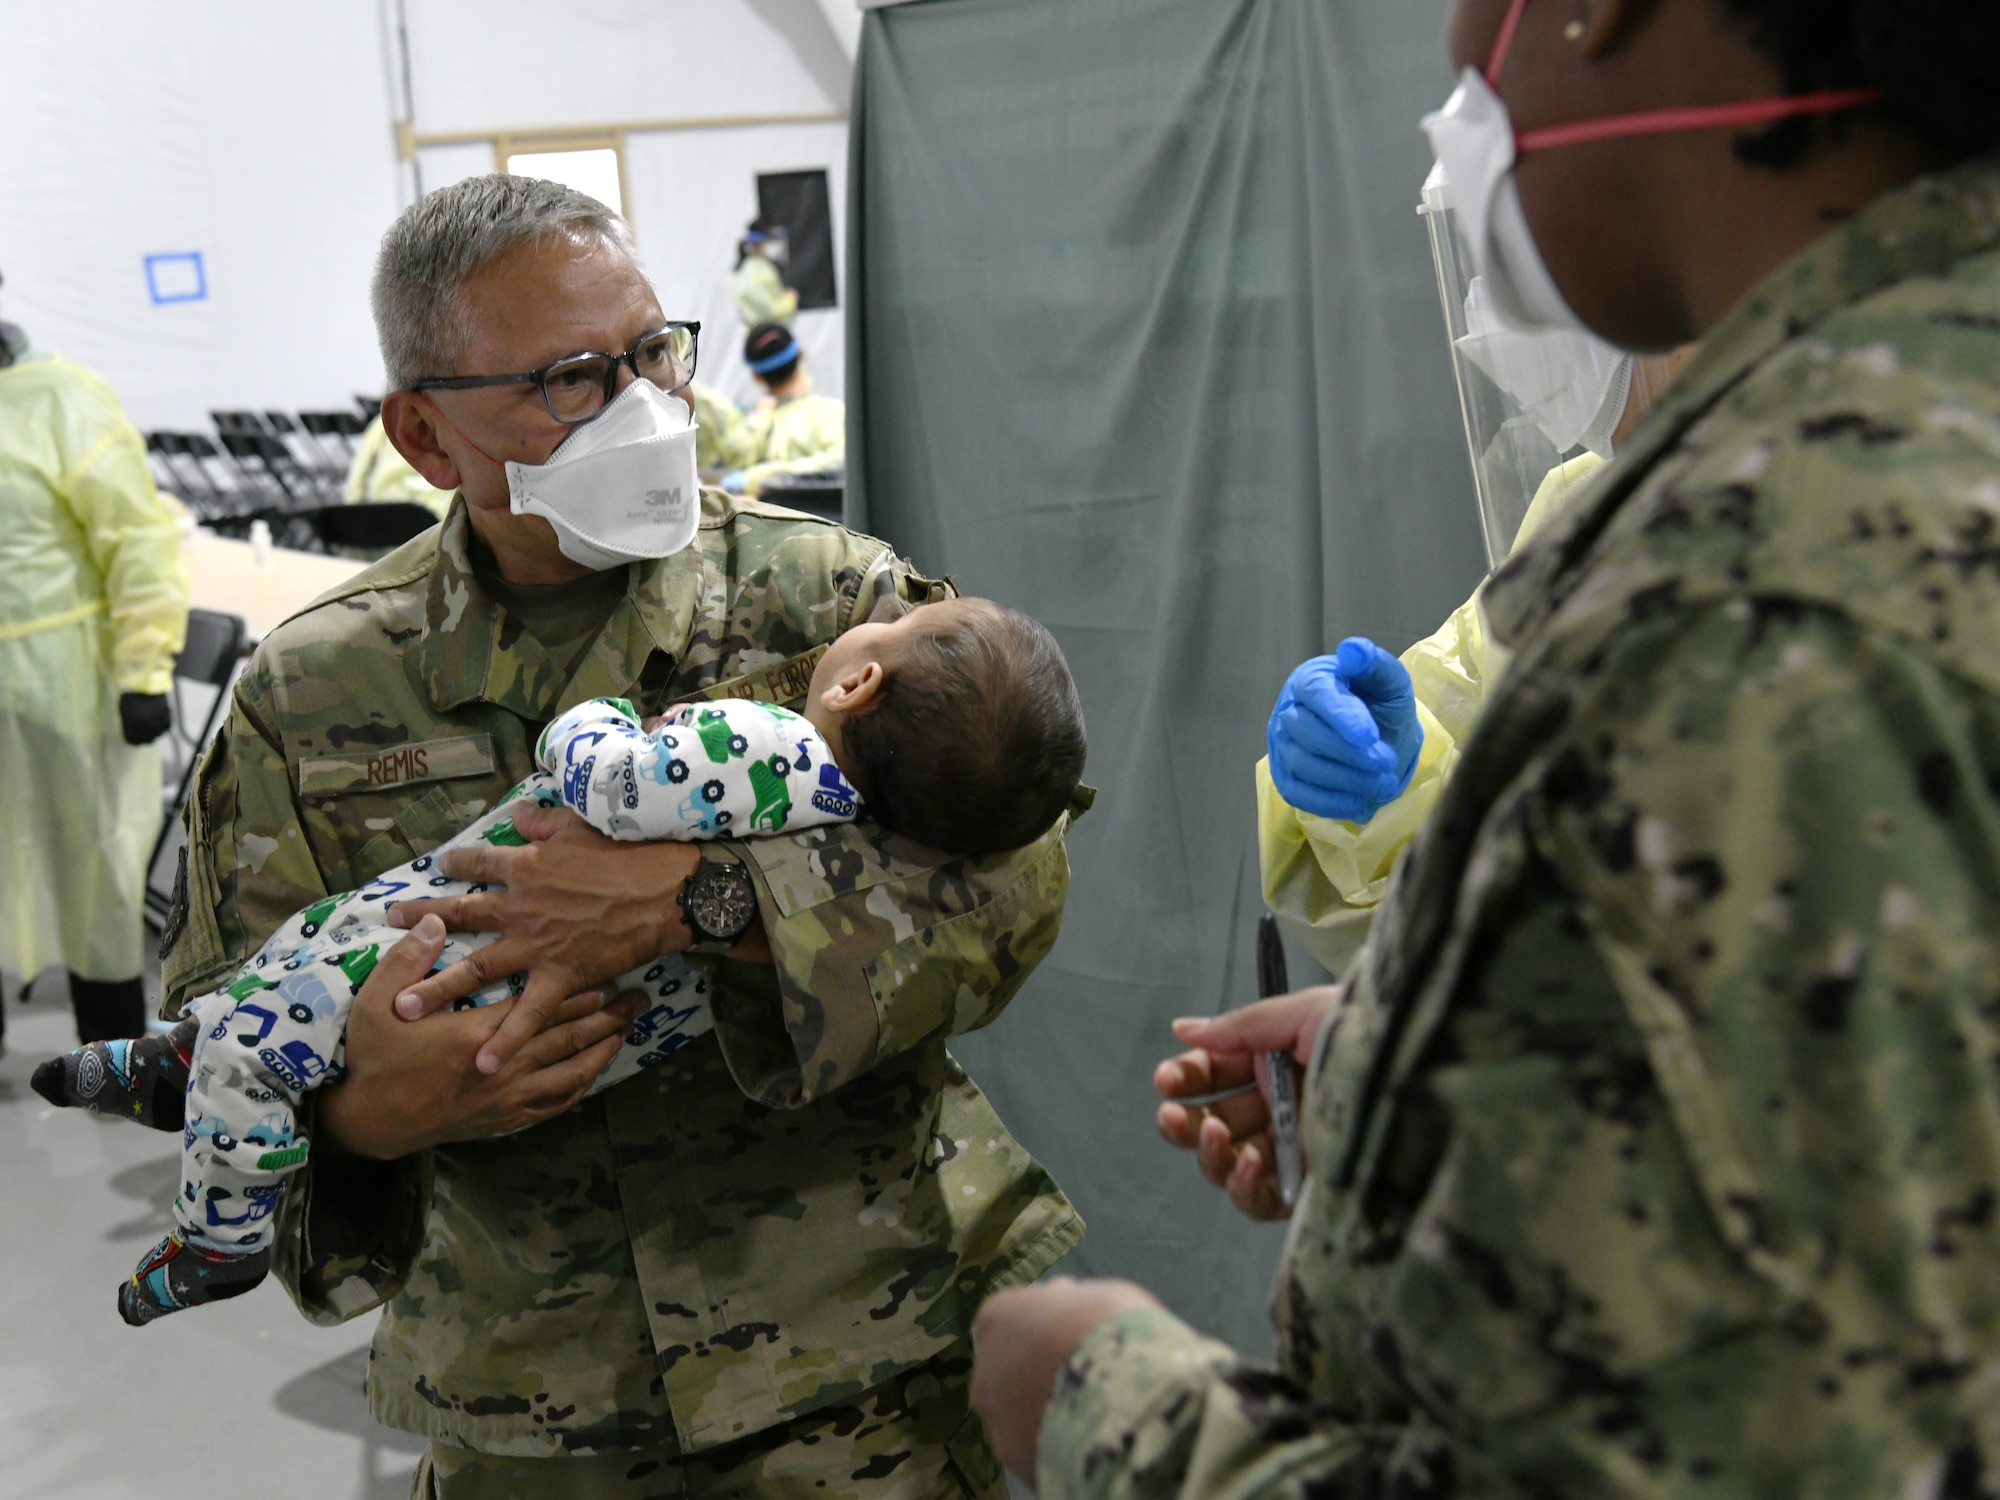 Washington Air National Guard Master Sgt. Andy Remis, assigned to the 116th Air Support Operations Squadron, Camp Murray, Wash., lends a helping hand, holding an Afghan child at the Task Force Liberty Village medical station, Joint Base McGuire-Dix-Lakehurst, New Jersey, Sept. 11, 2021.  The Department of Defense, through U.S. Northern Command, and in support of the Department of Homeland Security, is providing transportation, temporary housing, medical screening, and general support for at least 50,000 Afghan evacuees at suitable facilities, in permanent or temporary structures, as quickly as possible. This initiative provides Afghan personnel essential support at secure locations outside Afghanistan. (National Guard photo by Master Sgt. John Hughel, Washington Air National Guard)